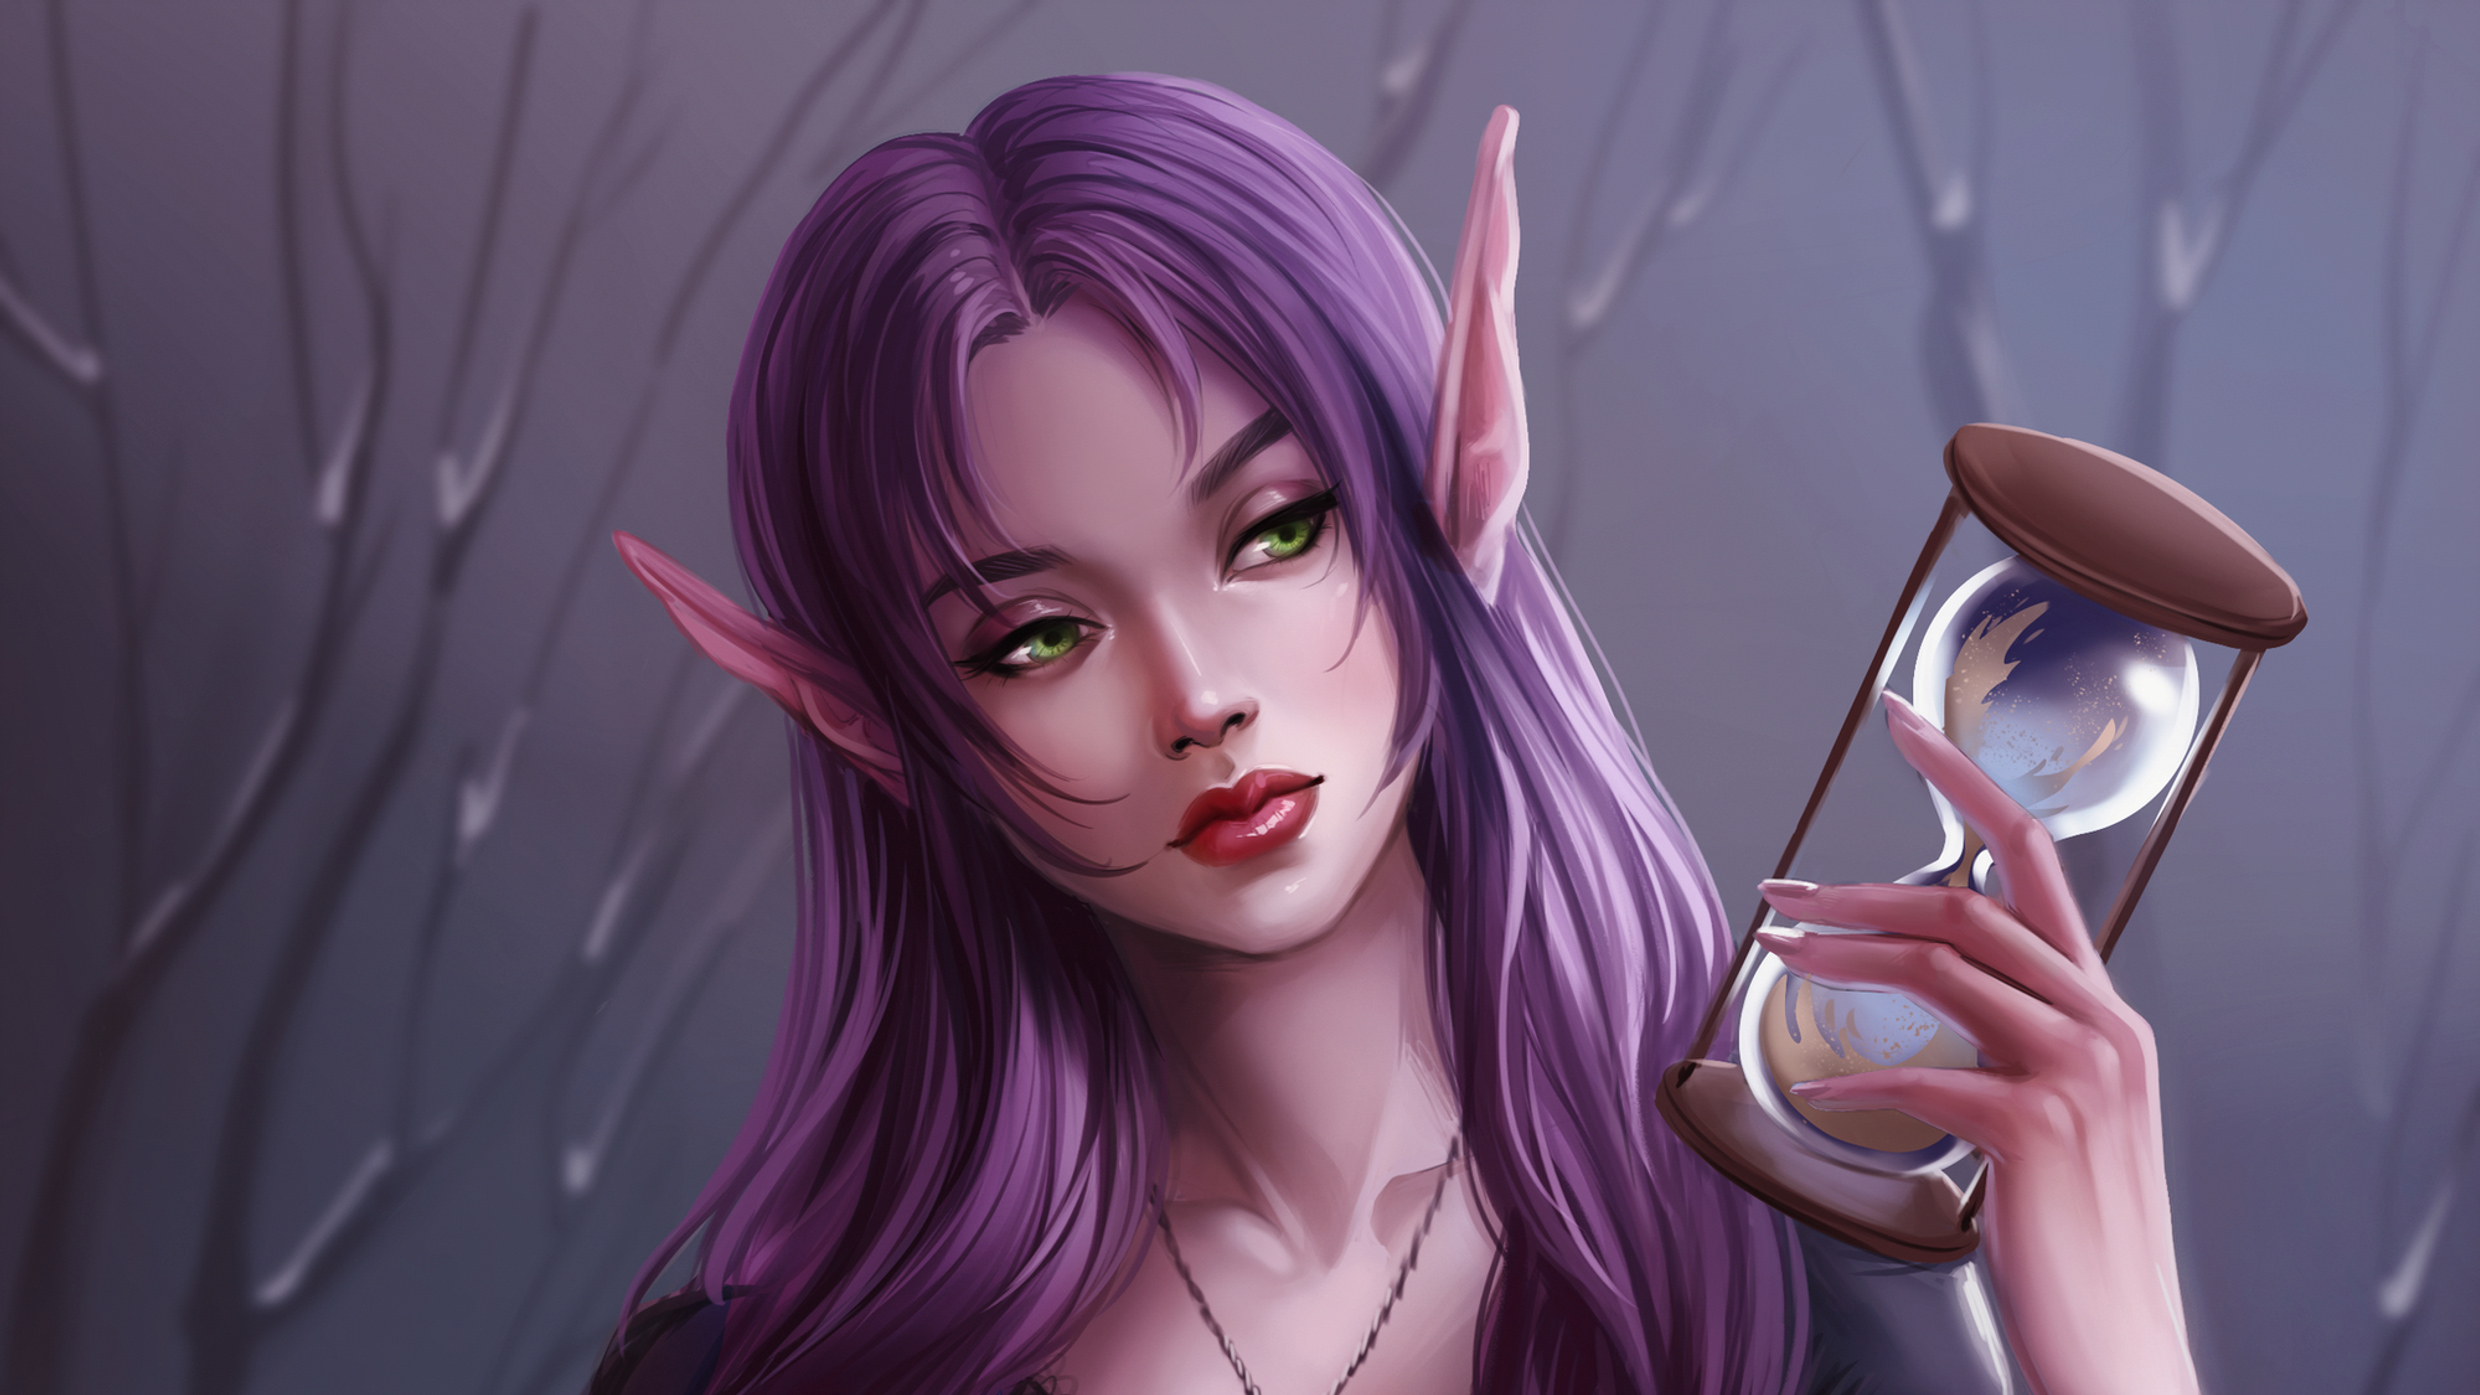 Fantasy Elf HD Wallpaper by Wernope